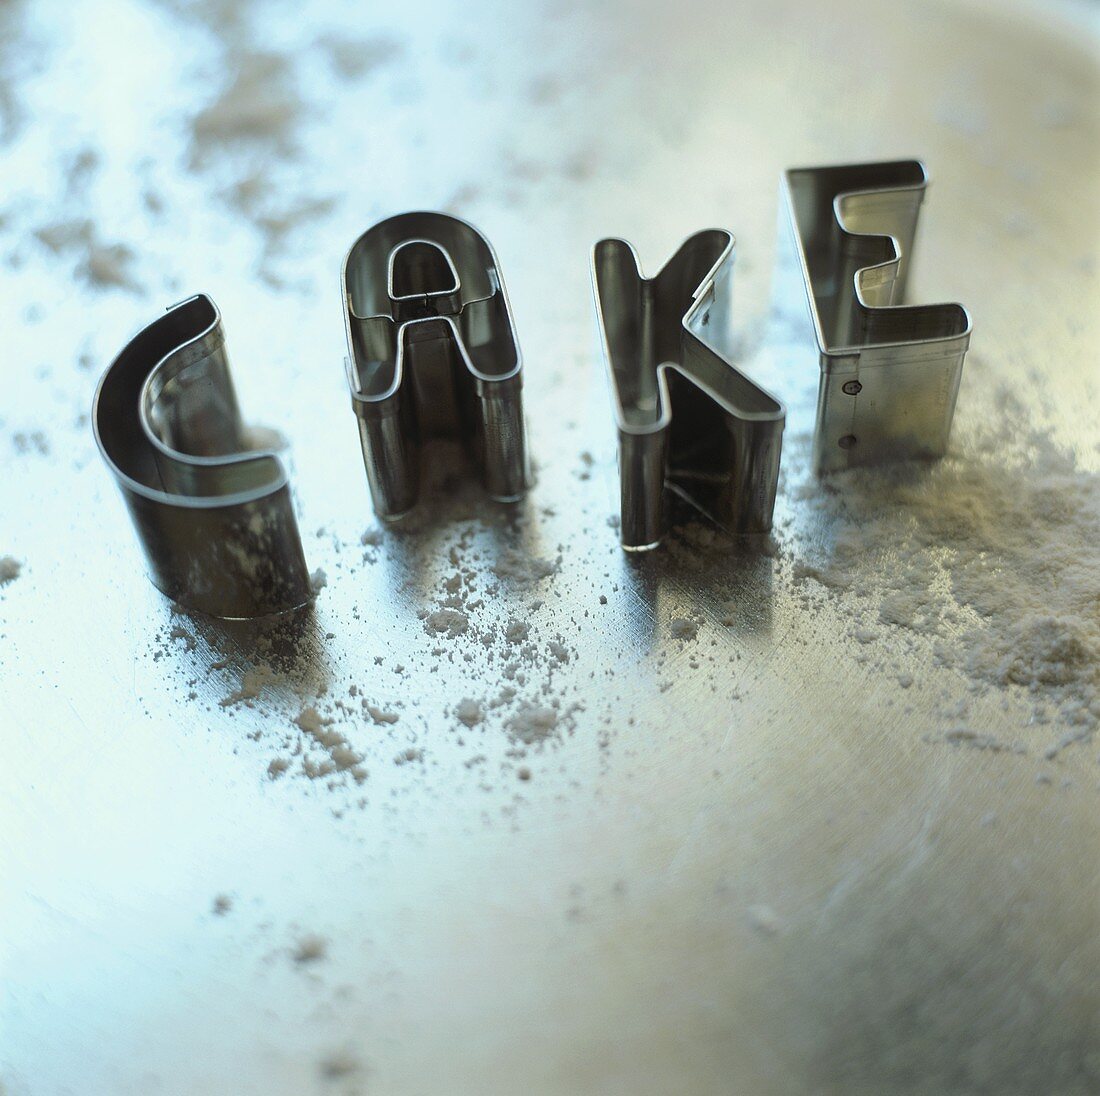 Cutters spelling the word 'Cake'